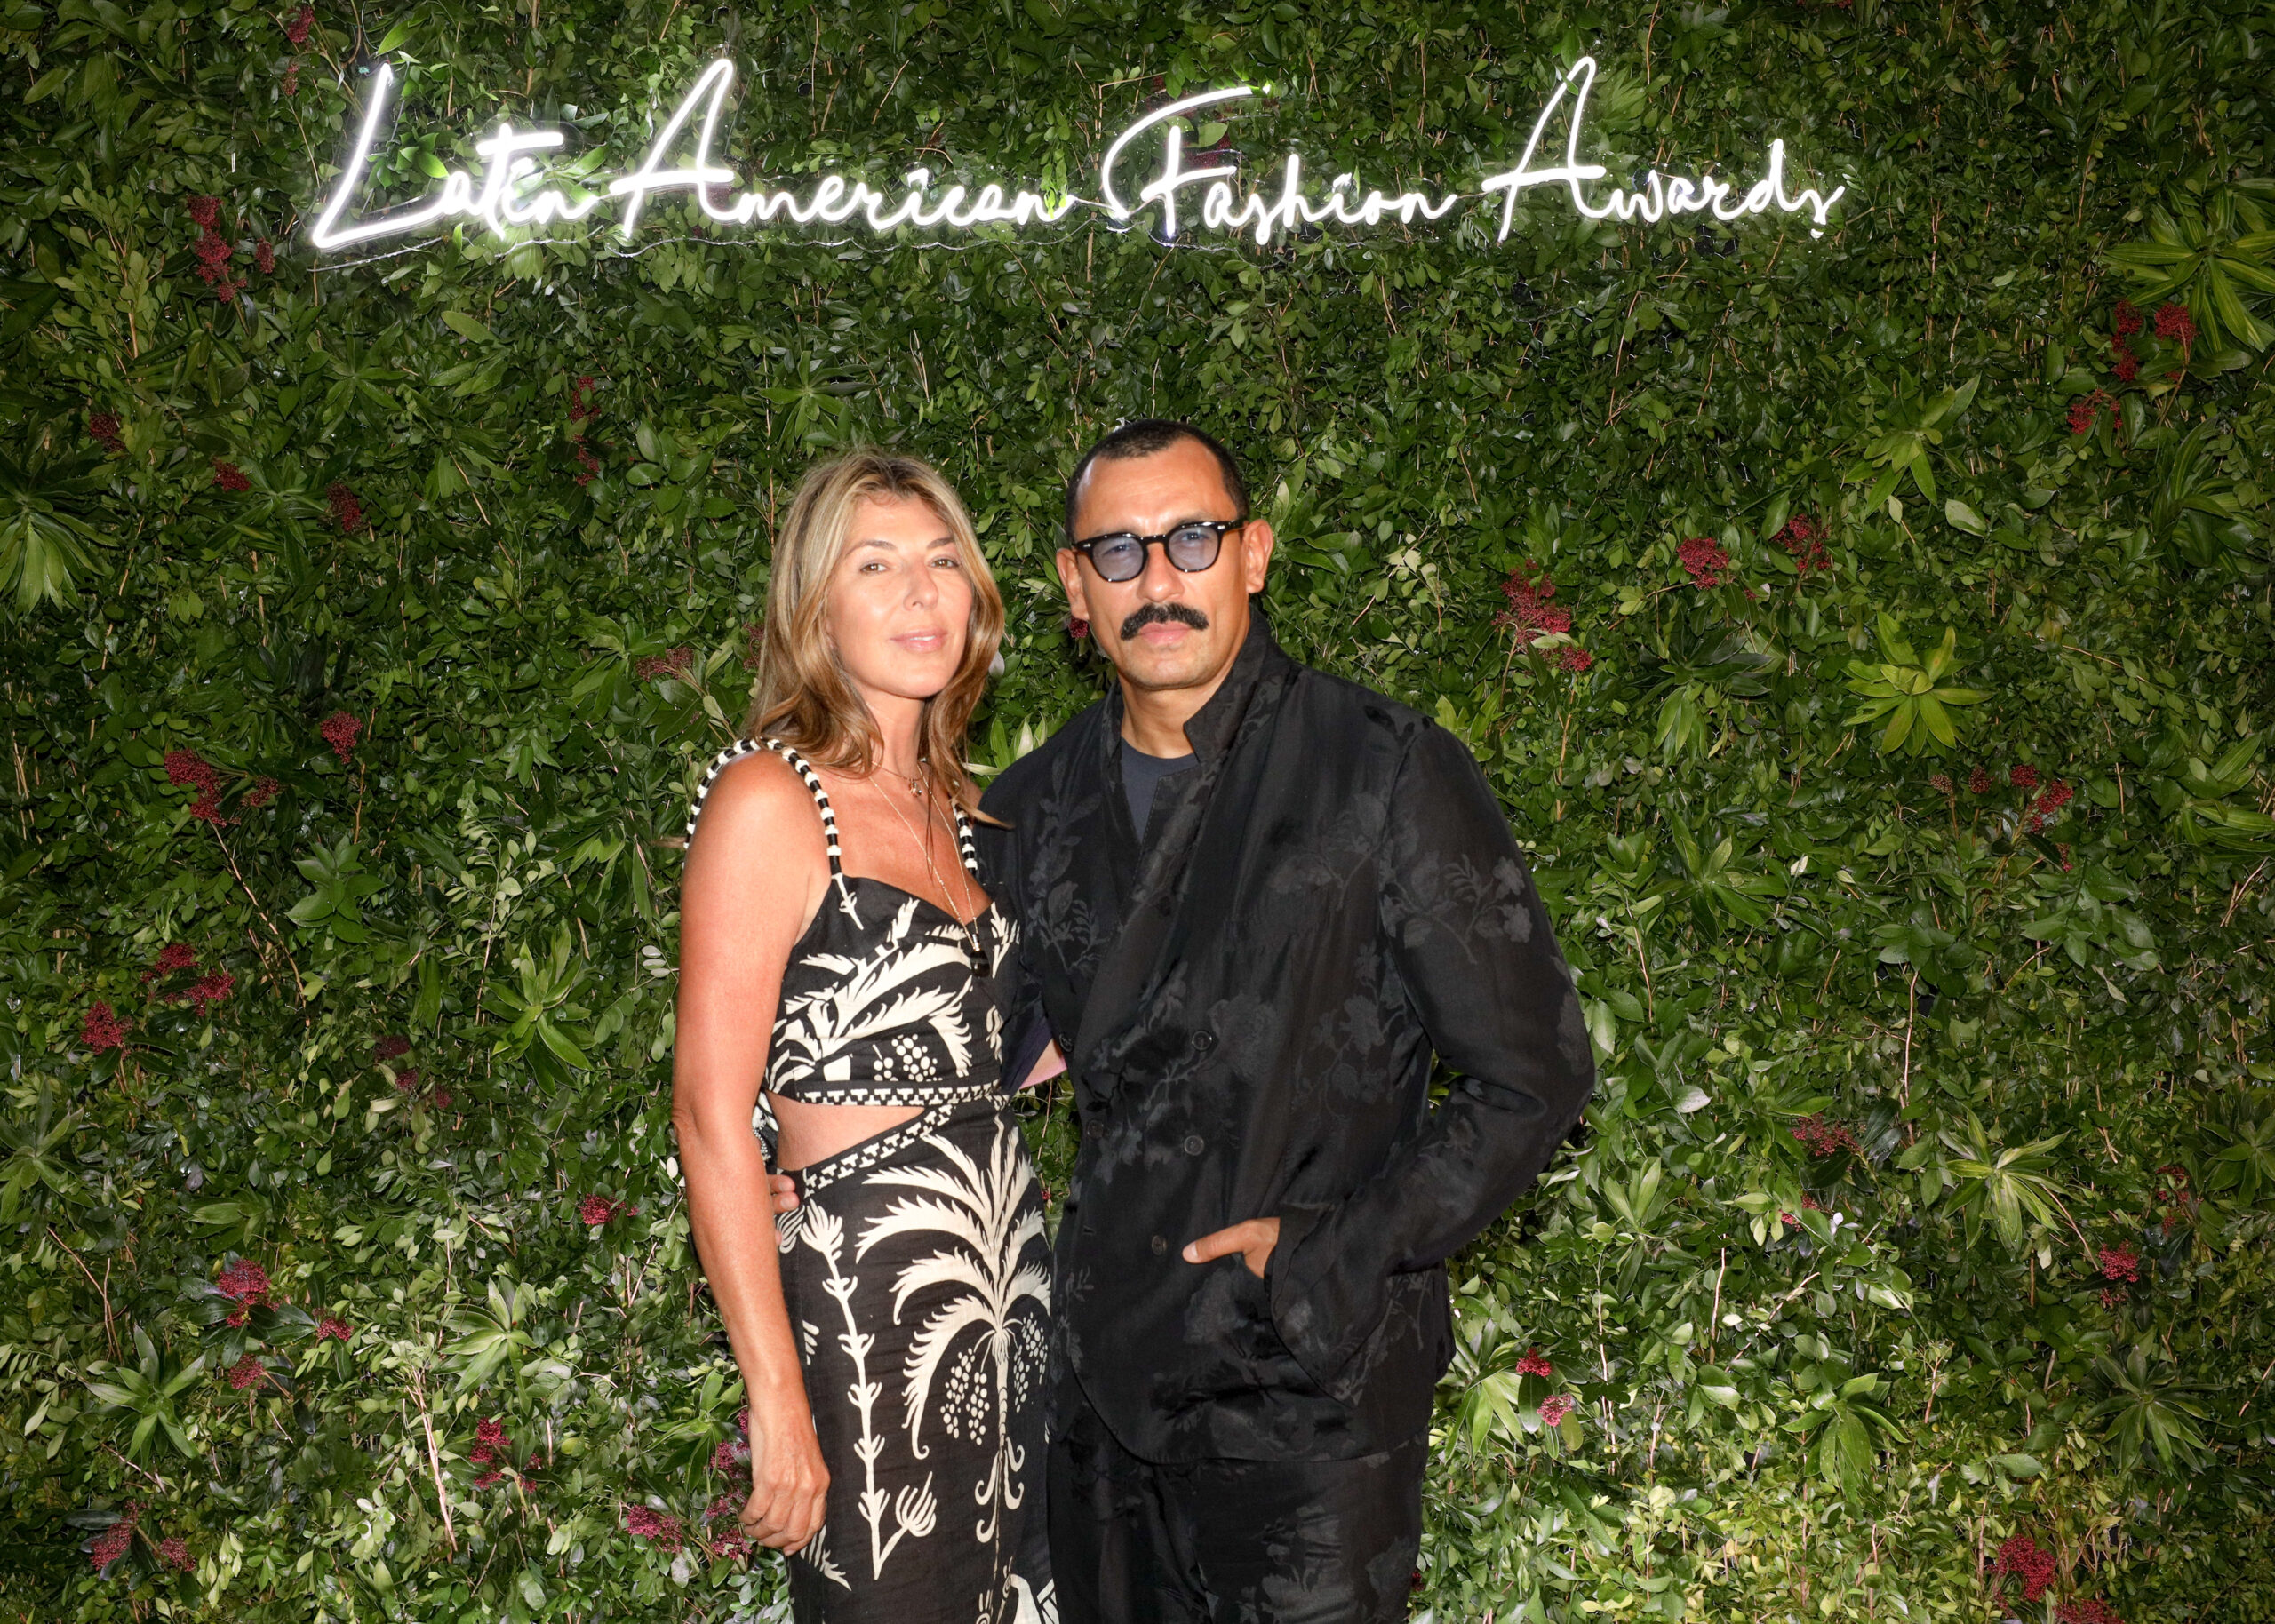 Style icons unite: Nina García and Haider Ackermann grace the verdant backdrop of the Latin American Fashion Awards, embodying the spirit of innovation and elegance in the world of fashion.